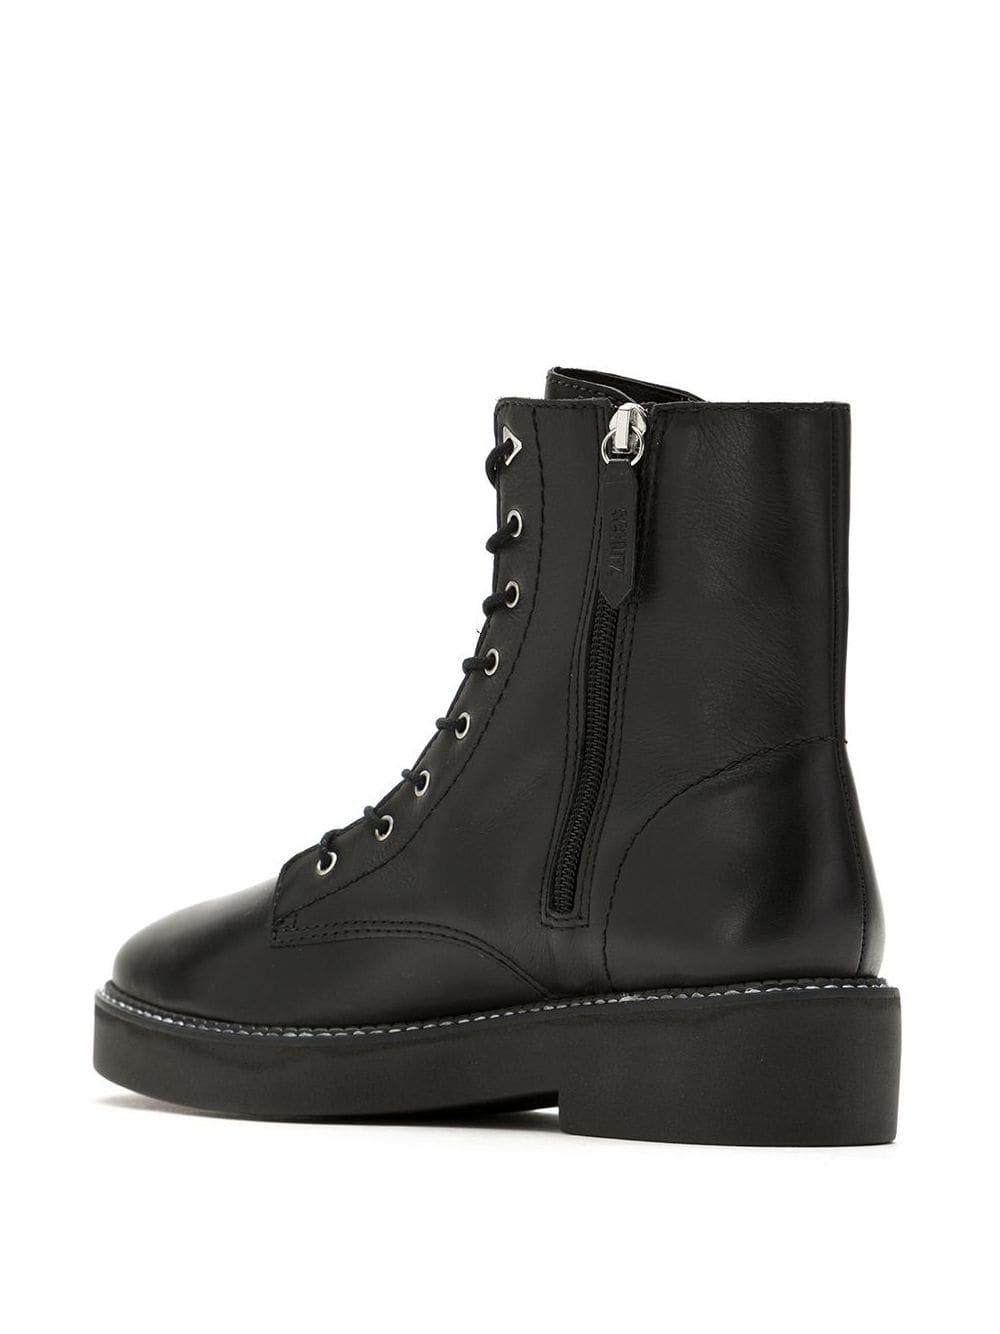 Schutz Side Zipped Military Boots in Black - Lyst